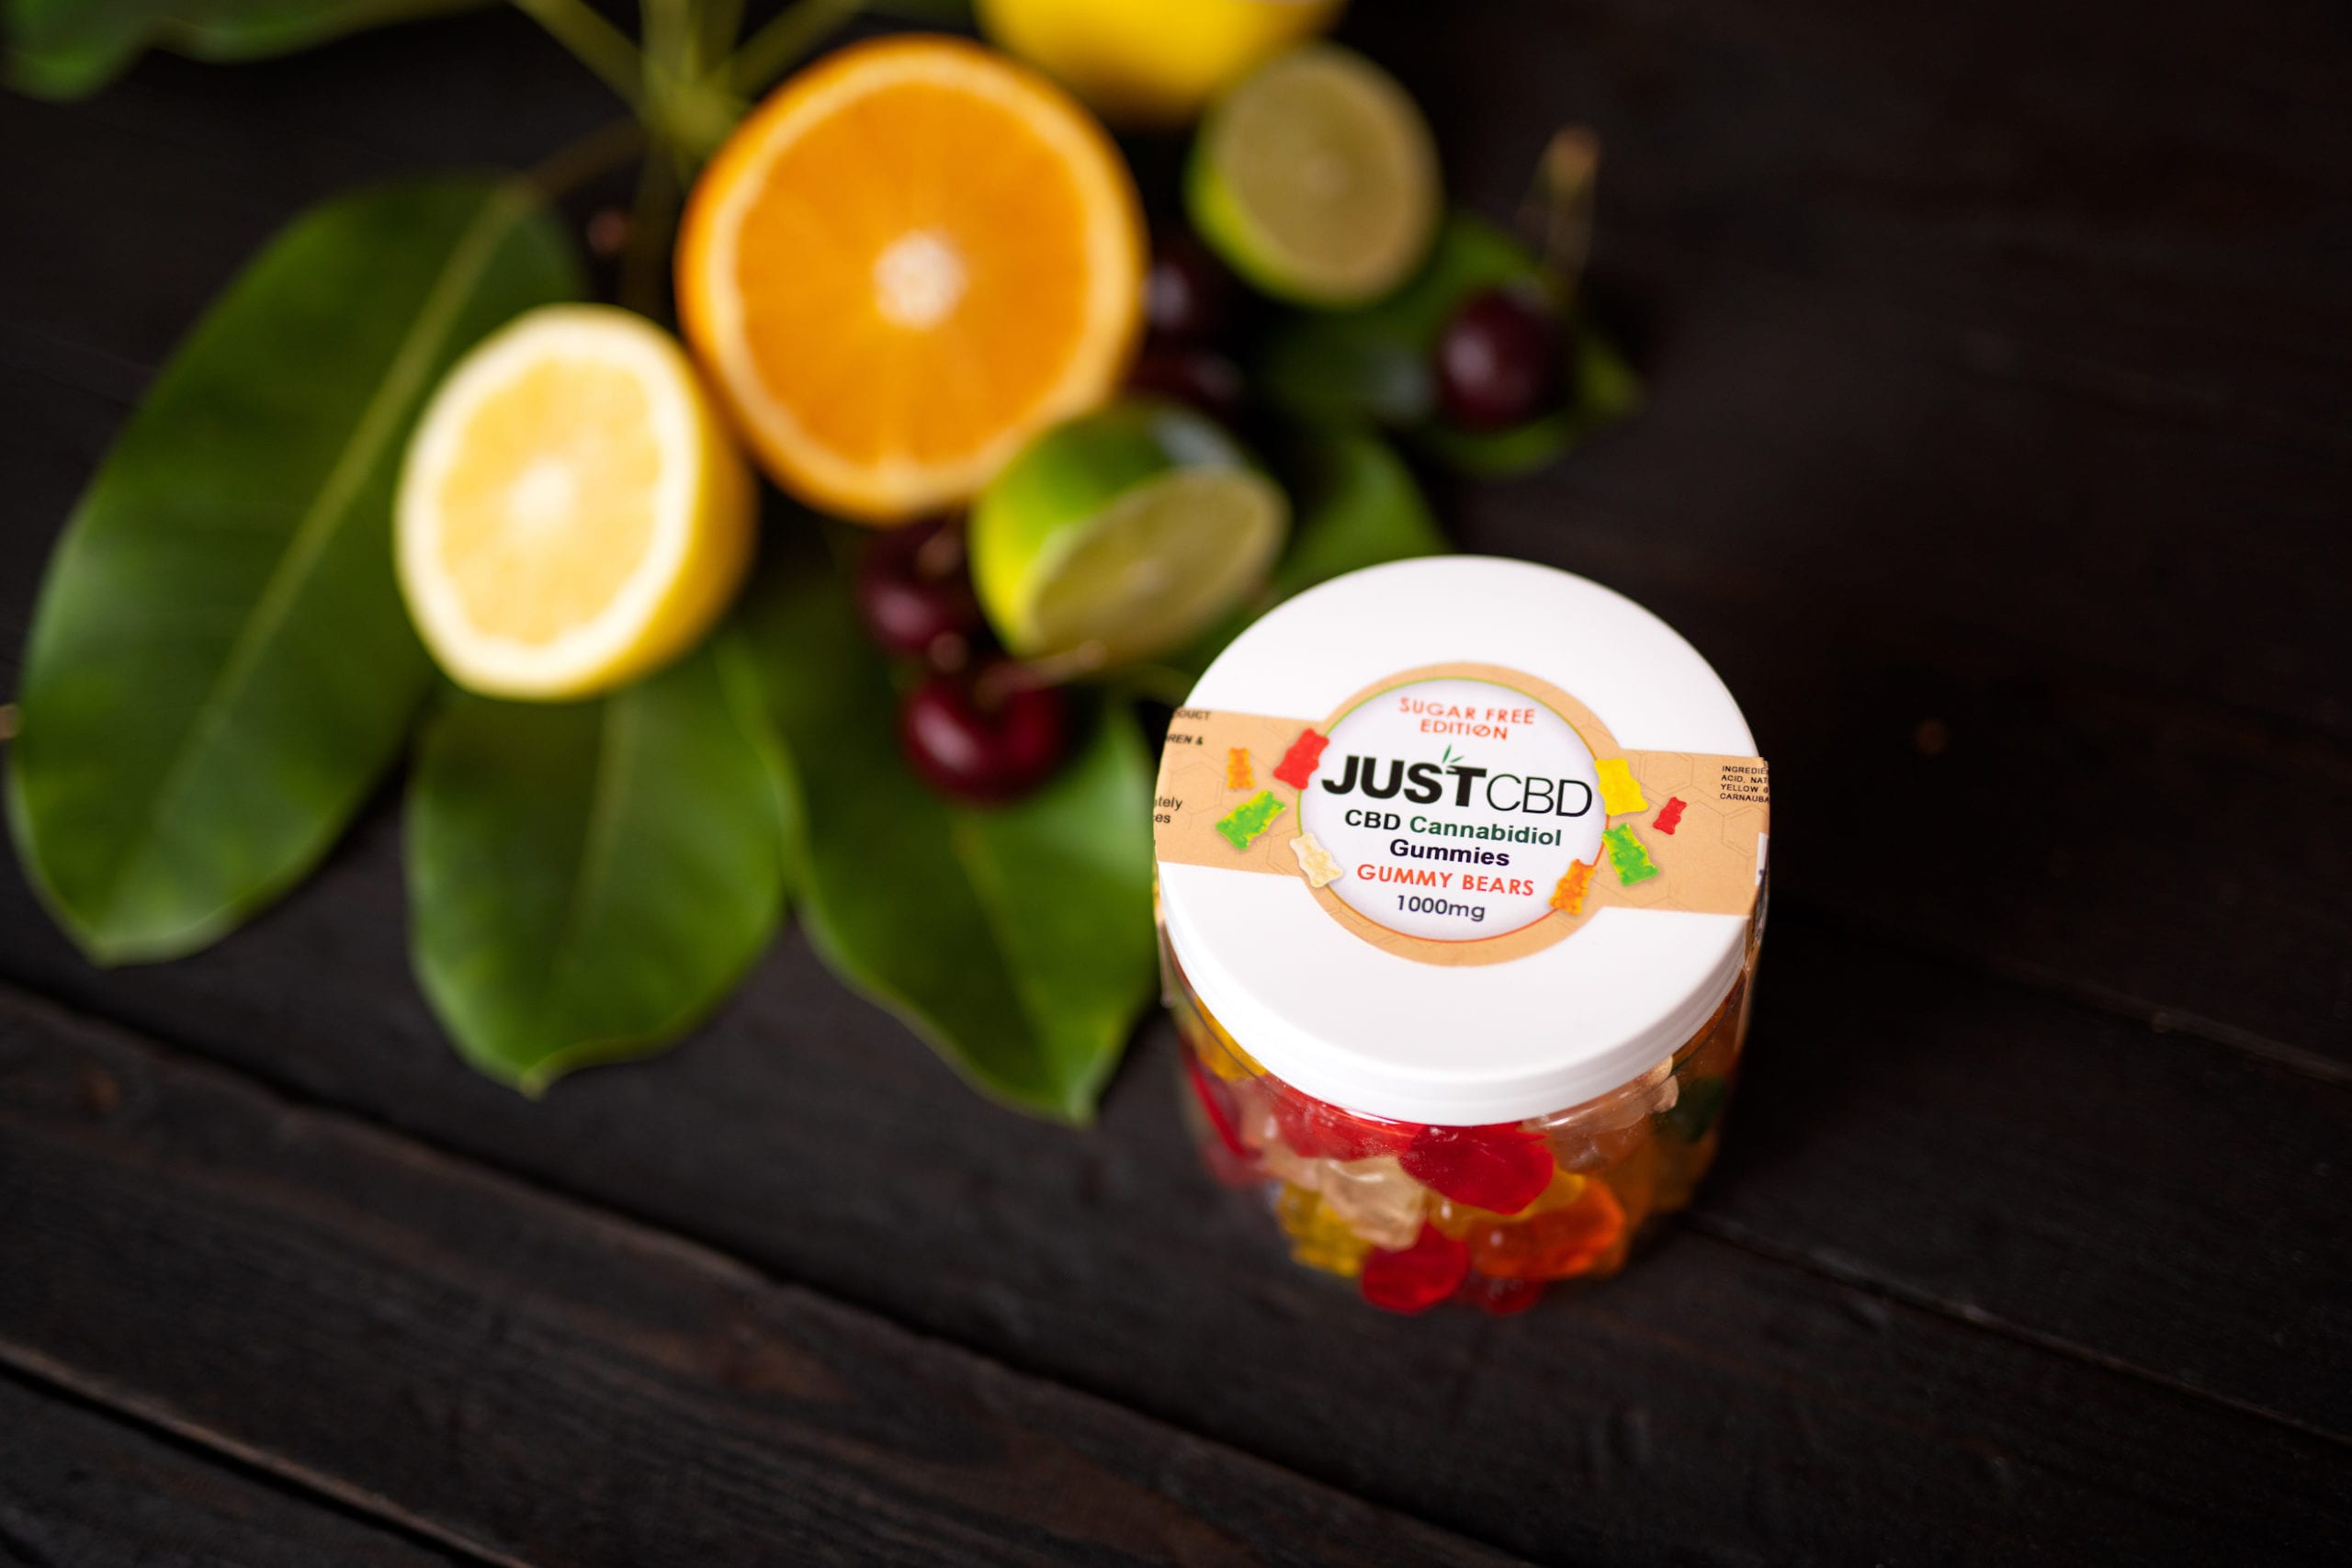 JustCBD Product Photography and Just CBD Products Sugar free gummy bears on display with citrus fruit and cherries nearby